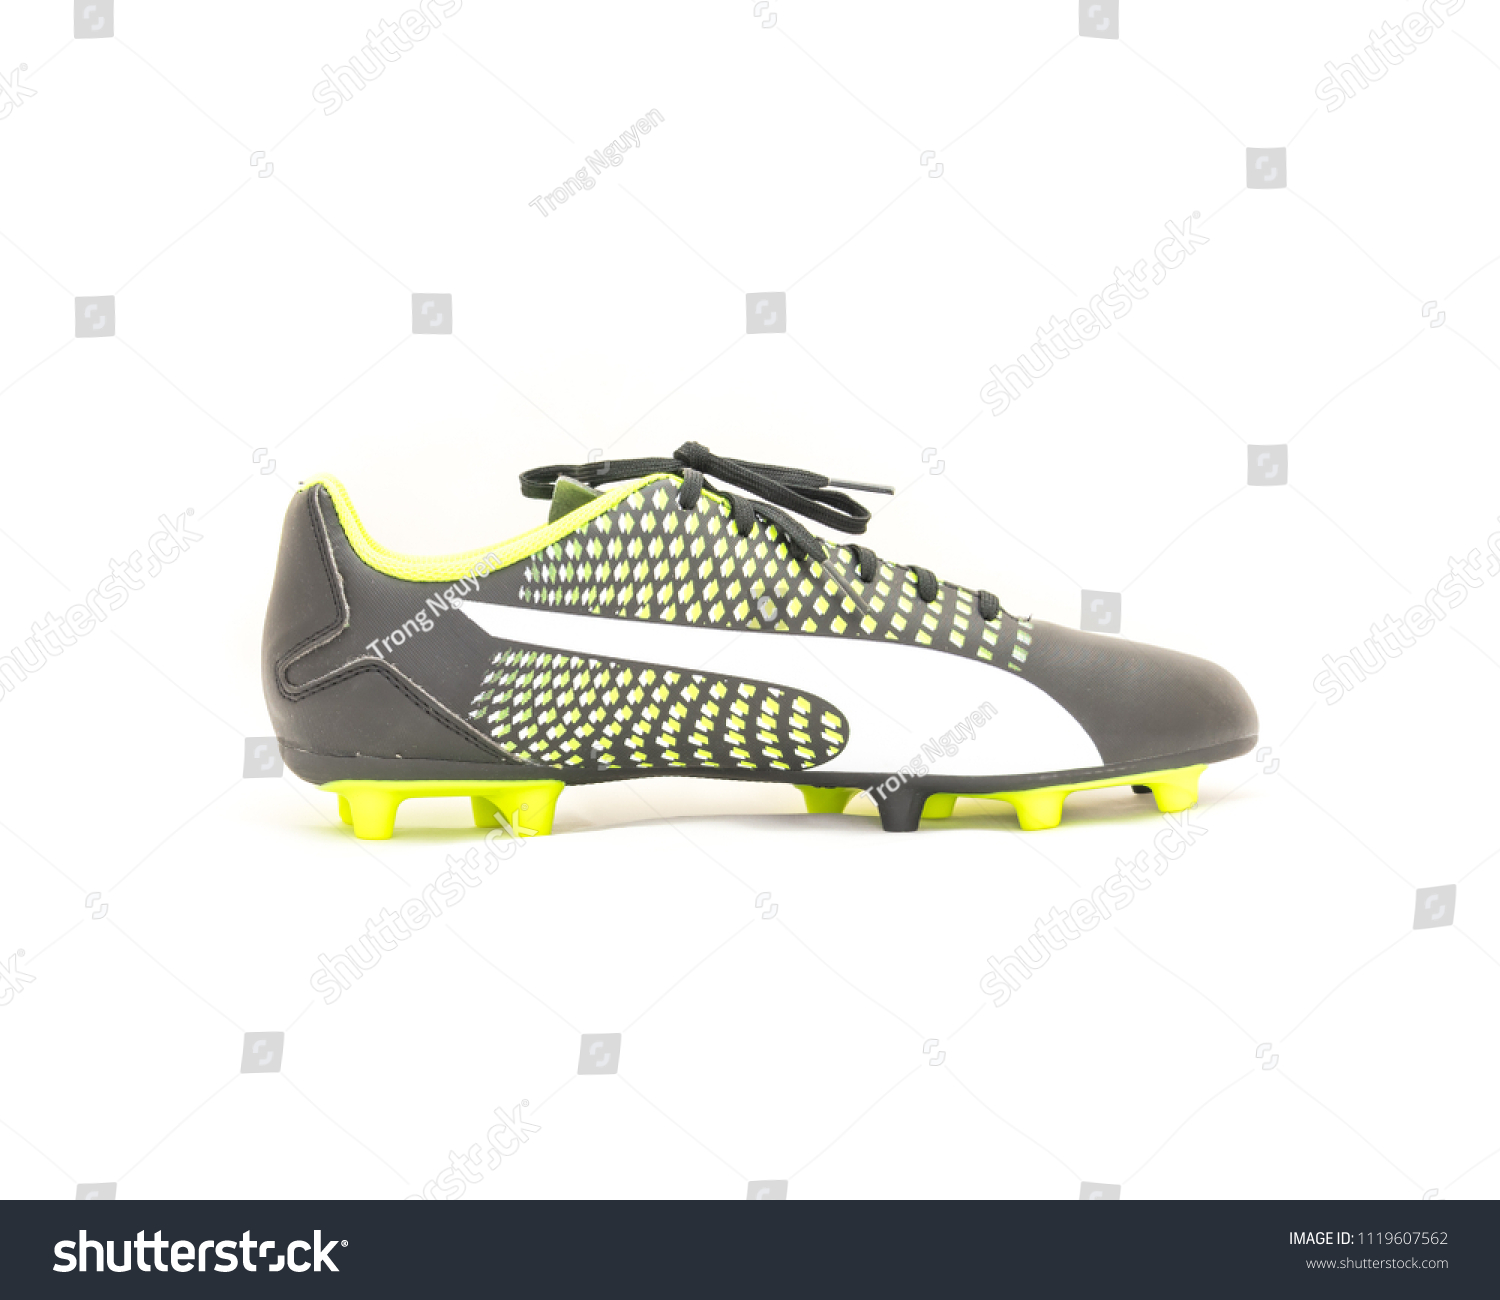 Unbranded Football Shoes Stock Photo 